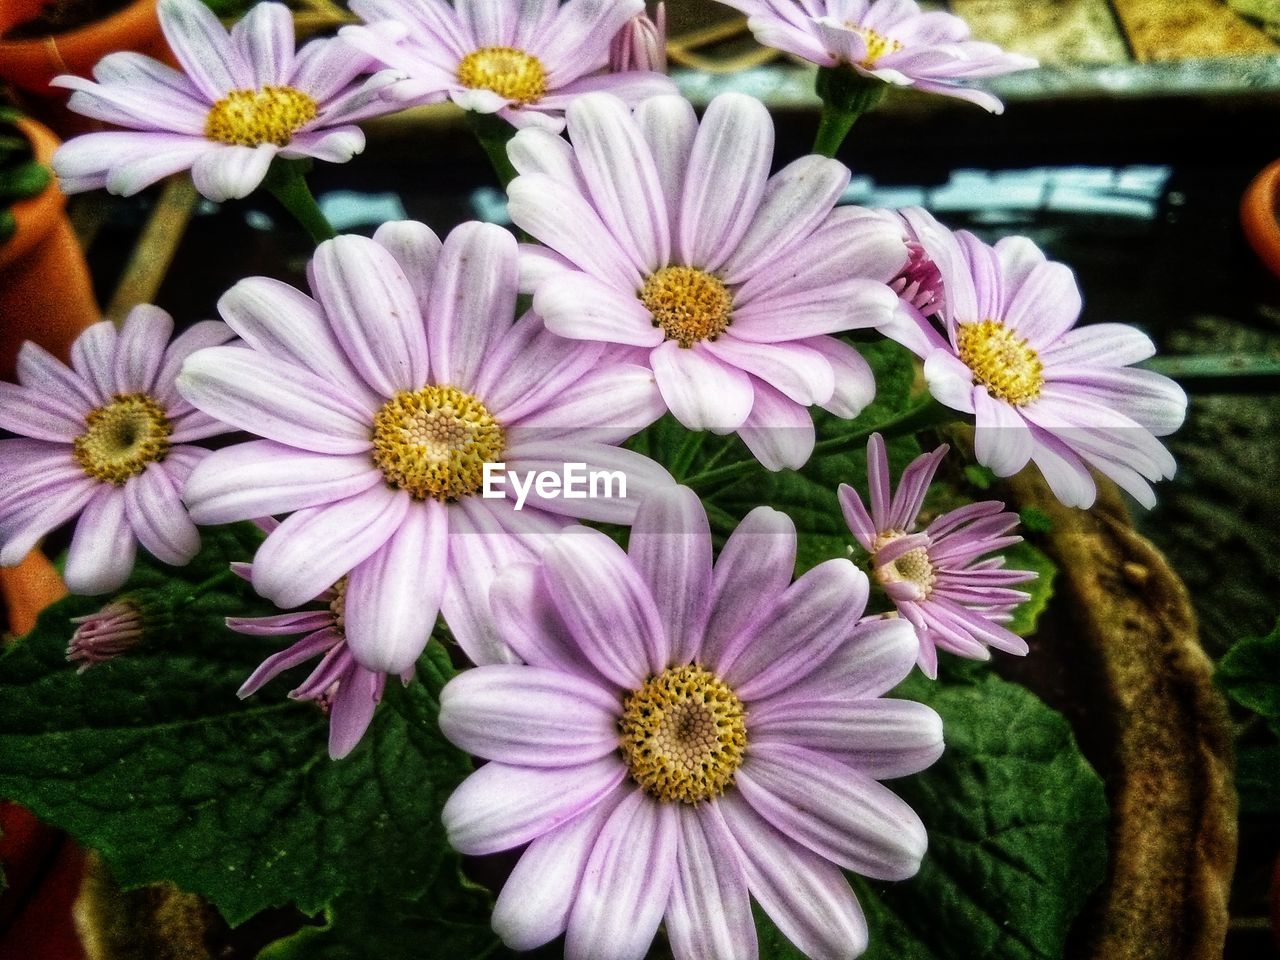 CLOSE-UP OF PINK AND PURPLE DAISY FLOWERS